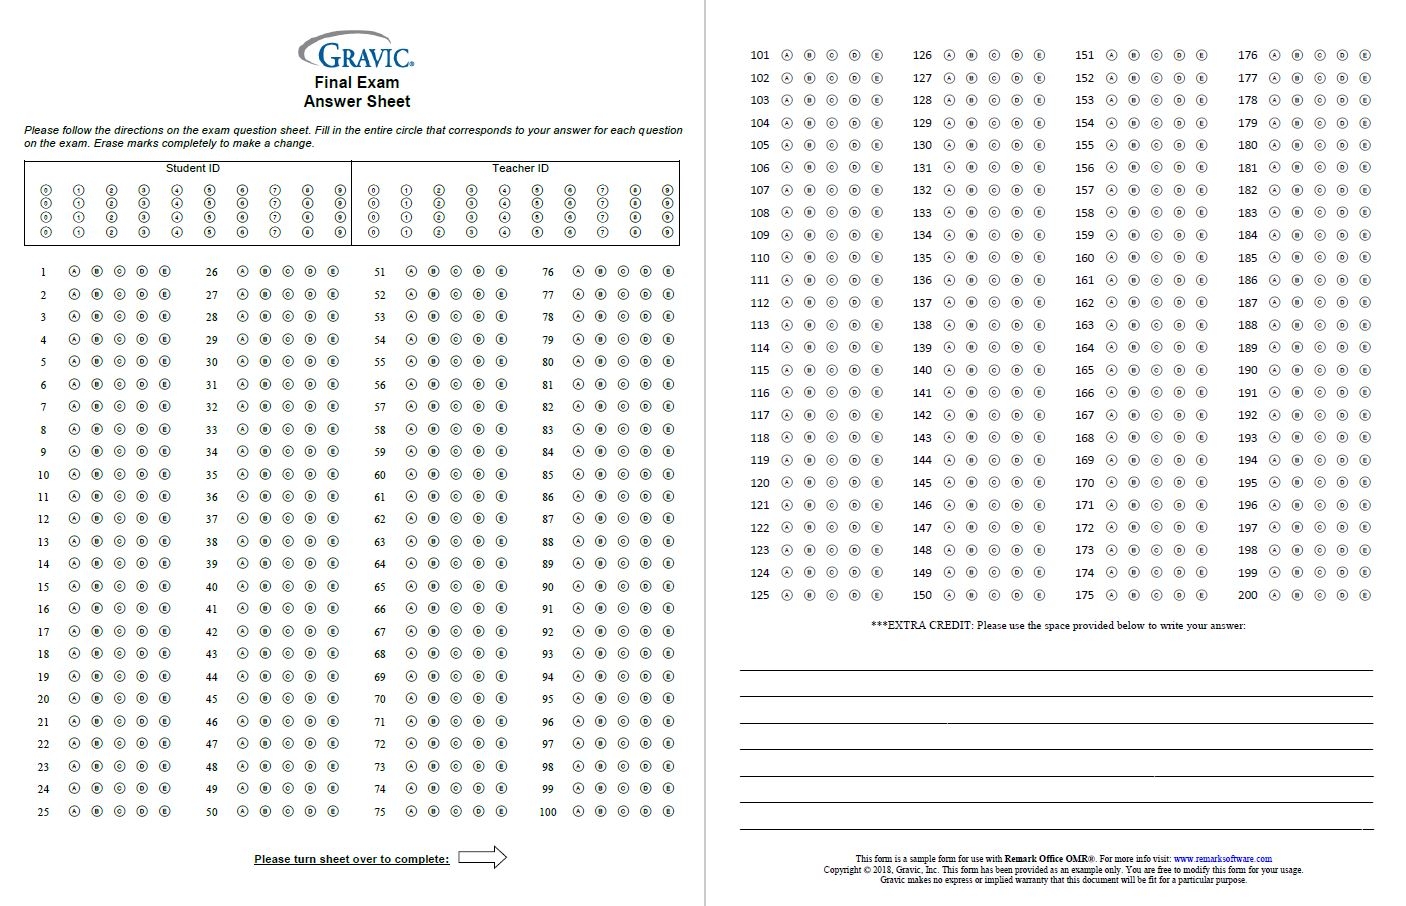 200 Question Test Answer Sheet With Extra Credit And Grid ID Remark Software - Free Printable Bubble Answer Sheets